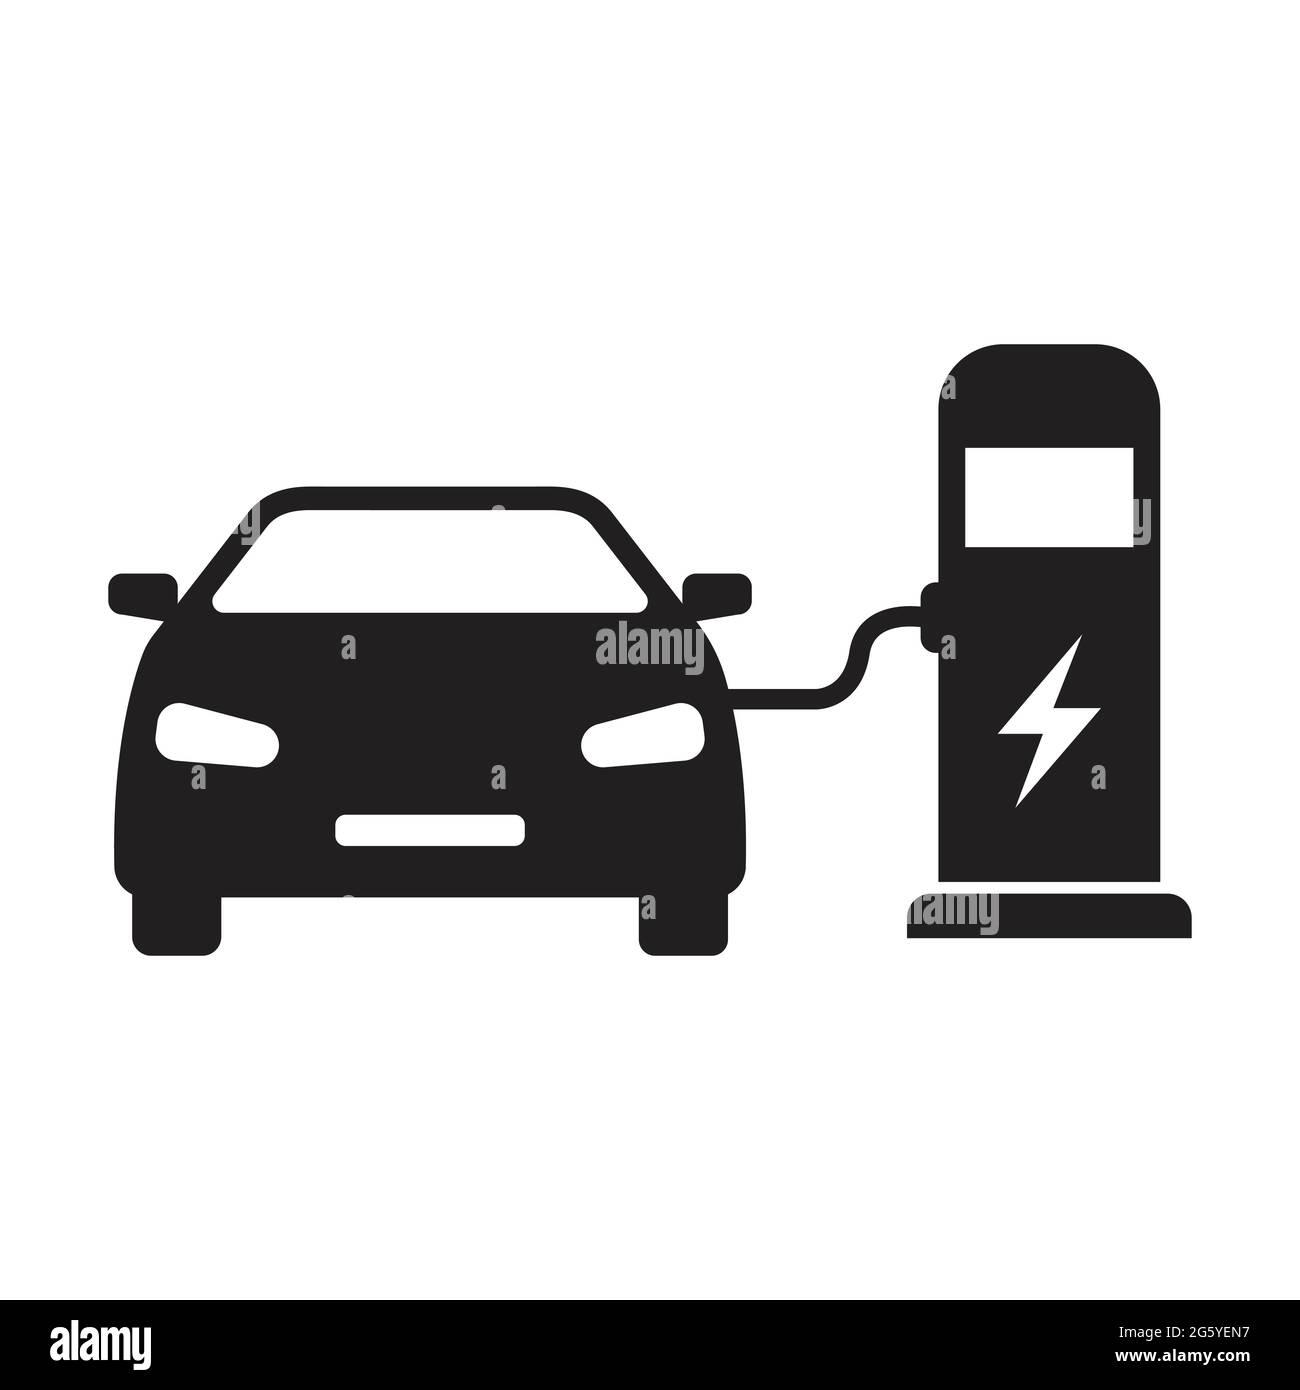 Green Electric Car Is Charging At The Station Flat Vector Illustration